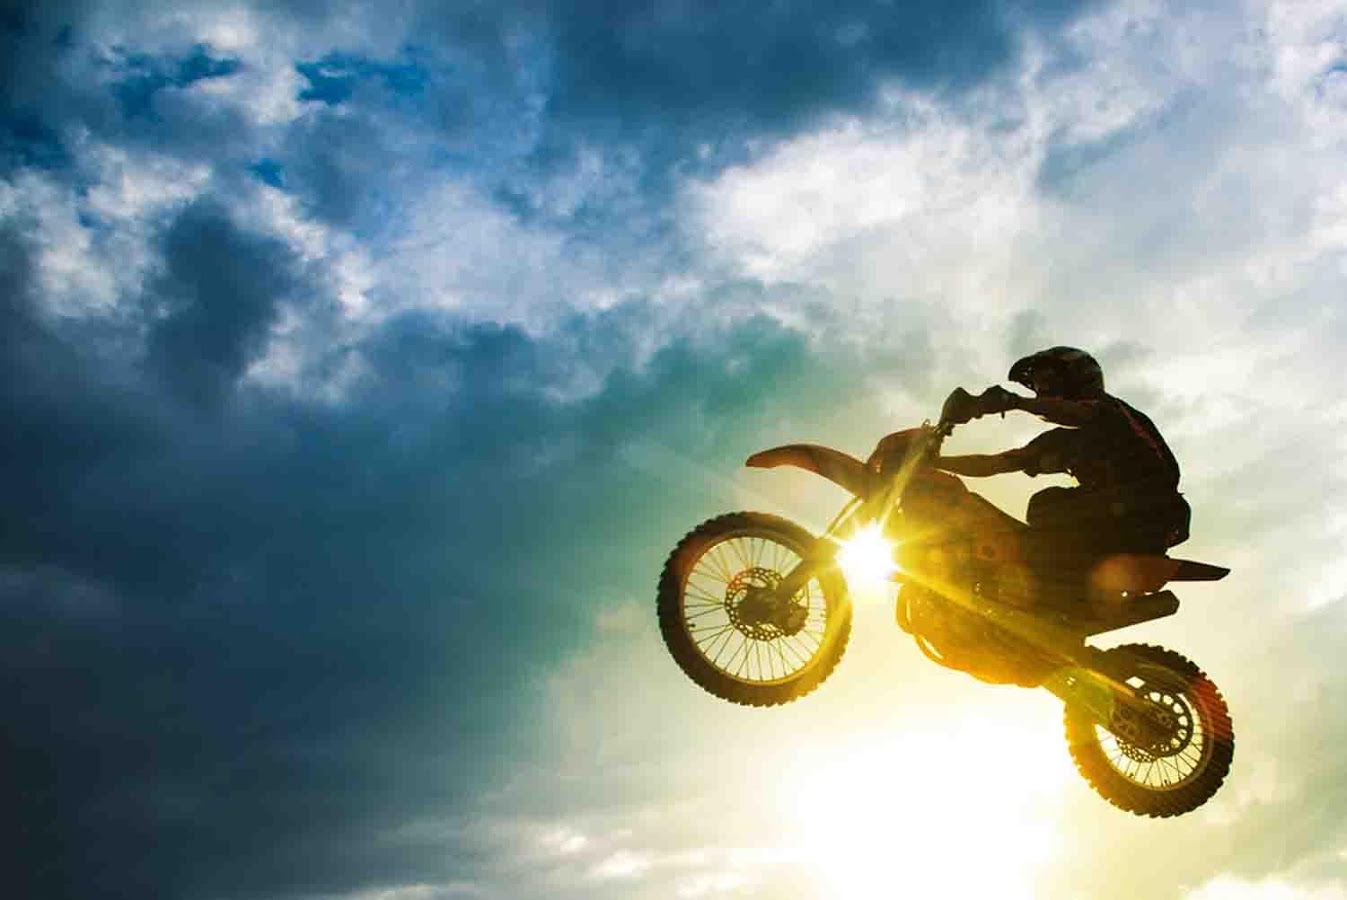 Motocross Wallpaper - Android Apps on Google Play